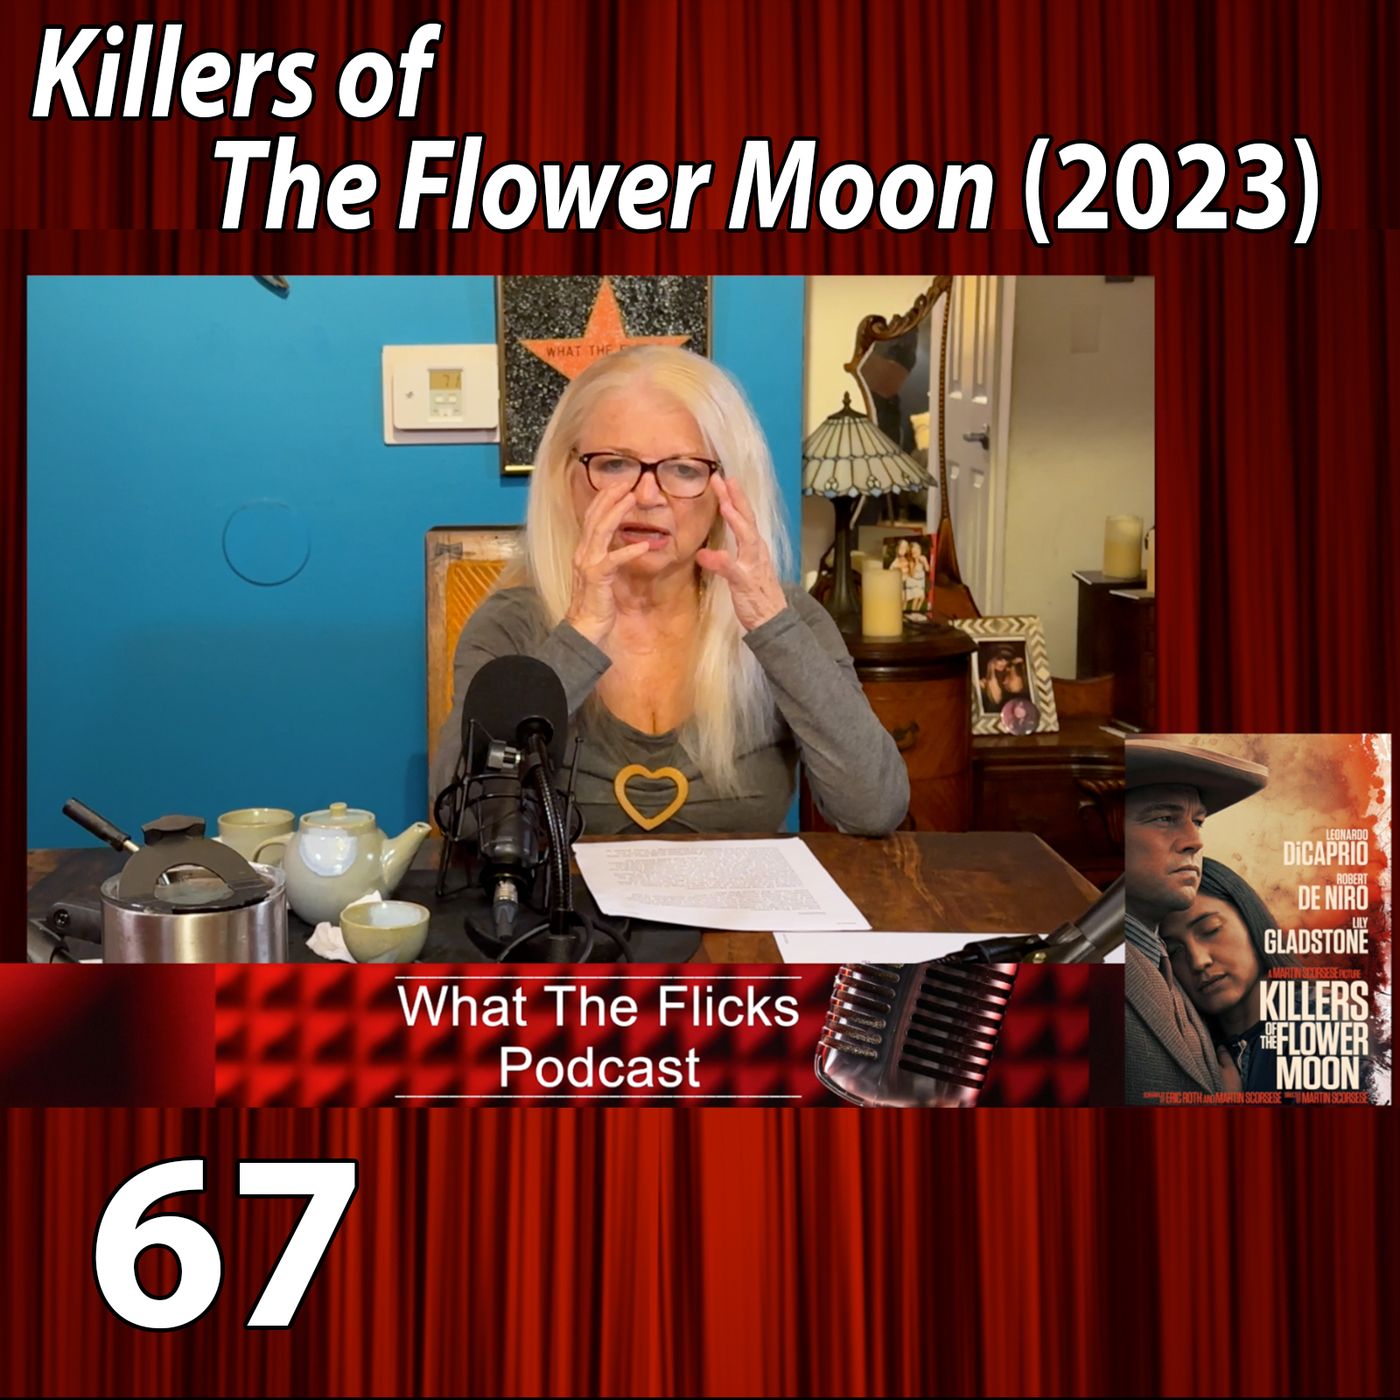 WTF 67 “Killers of The Flower Moon” (2023)